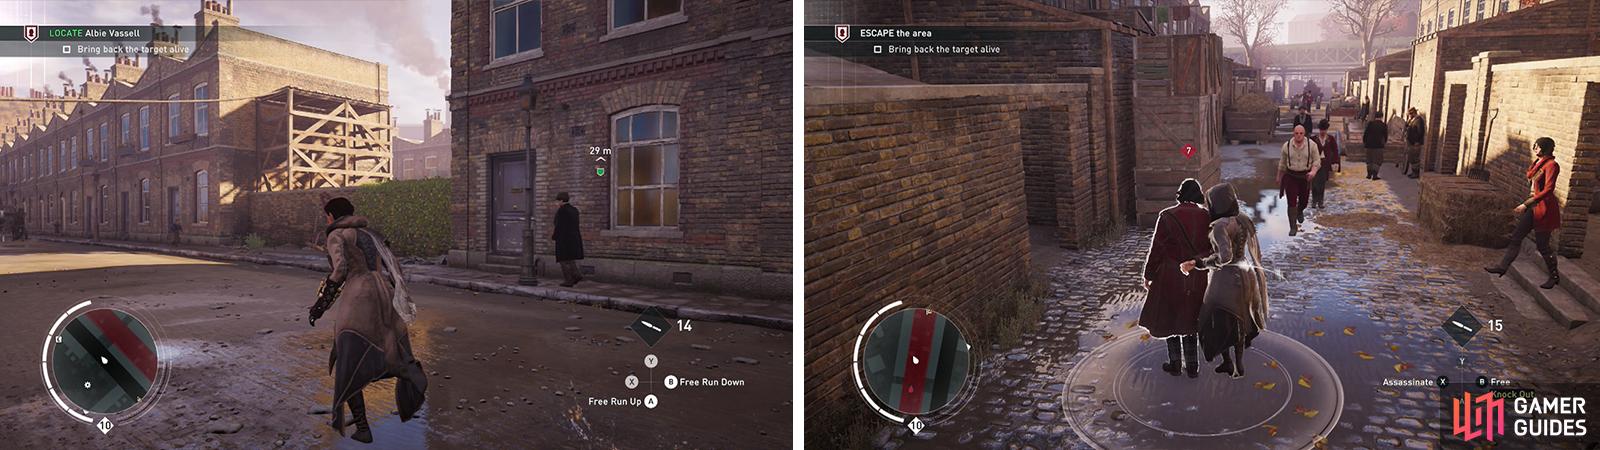 Locate the short wall along the street (left) the target is just beyond. Escort him to the end of the alley (right).